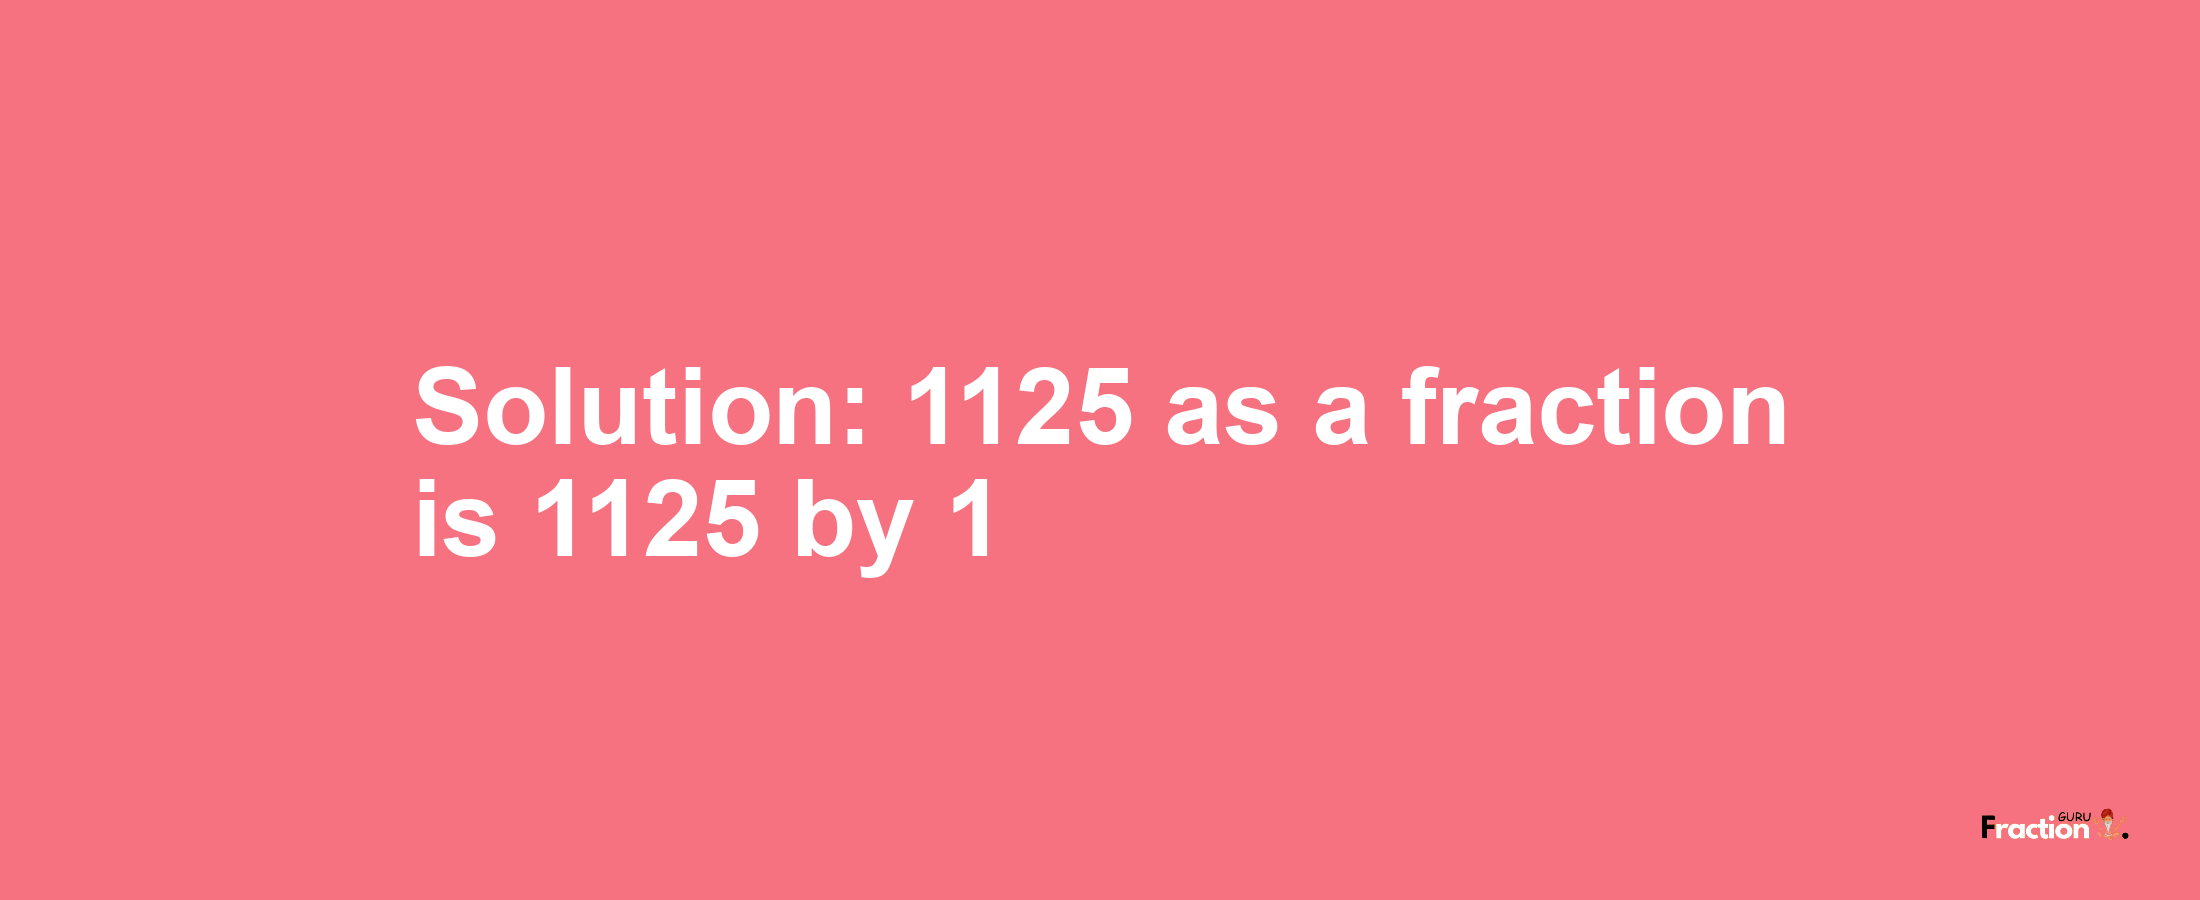 Solution:1125 as a fraction is 1125/1